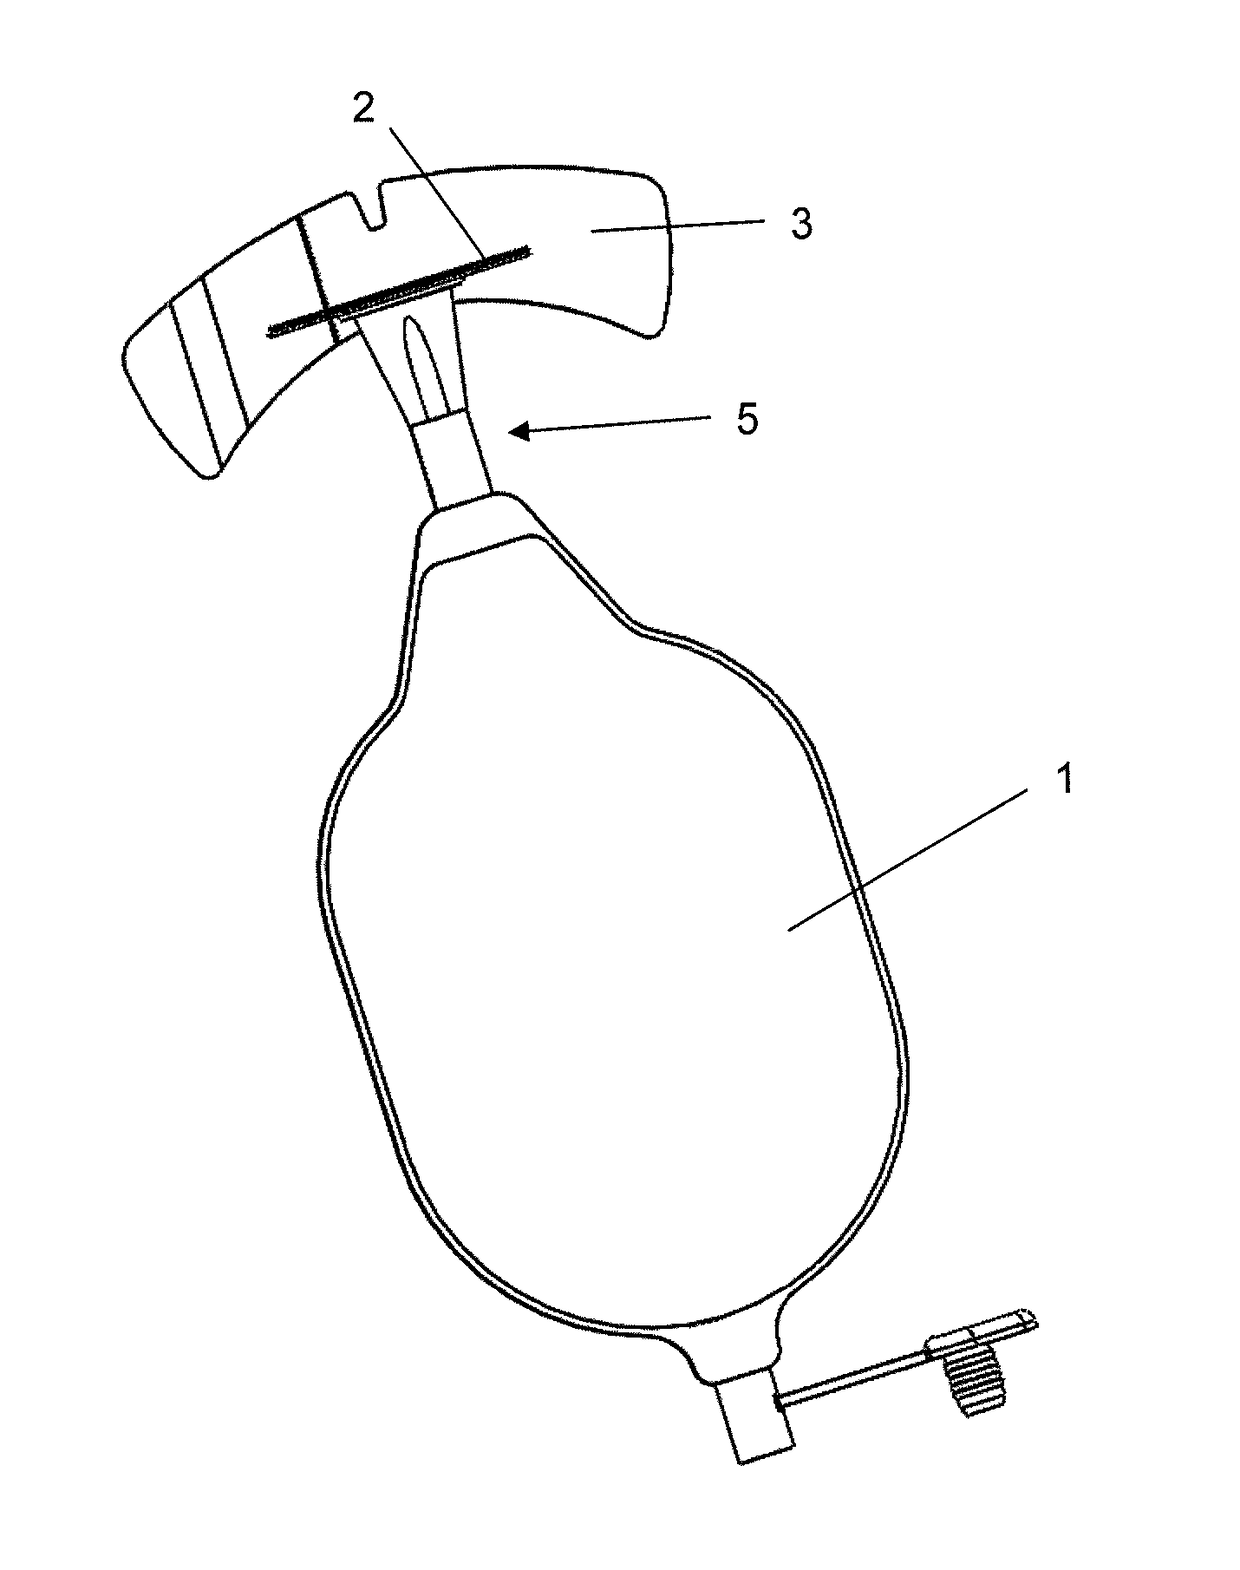 Incontinence device with atmospheric equilibrium valve assembly